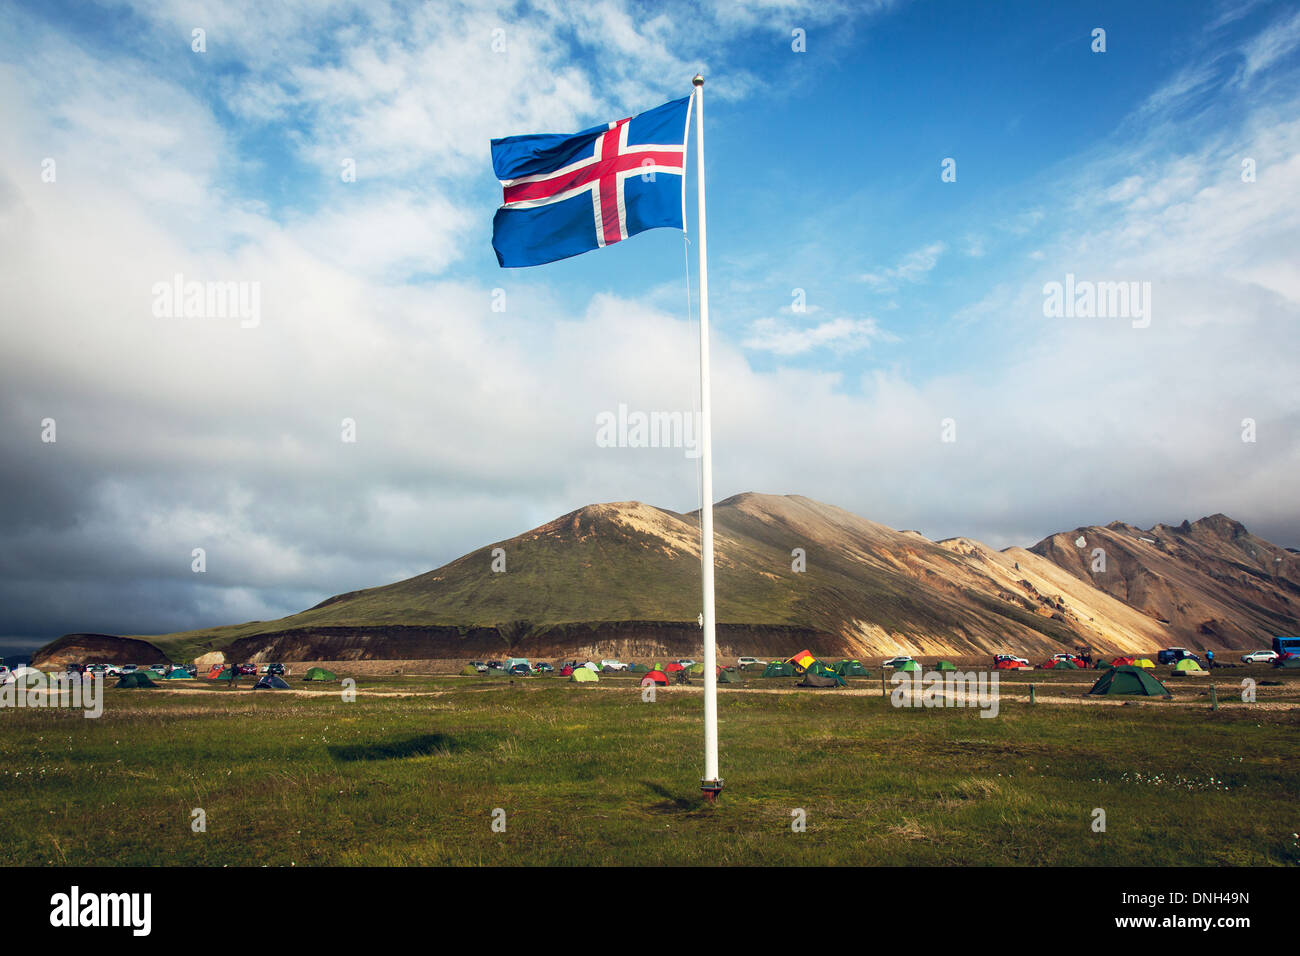 ICELANDIC FLAG WAVING OVER THE CAMPSITE OF LANDMANNALAUGAR, VOLCANIC AND GEOTHERMAL ZONE OF WHICH THE NAME LITERALLY MEANS 'HOT BATHS OF THE PEOPLE OF THE LAND', REGION OF THE HIGH PLATEAUS, SOUTHERN ICELAND, EUROPE Stock Photo